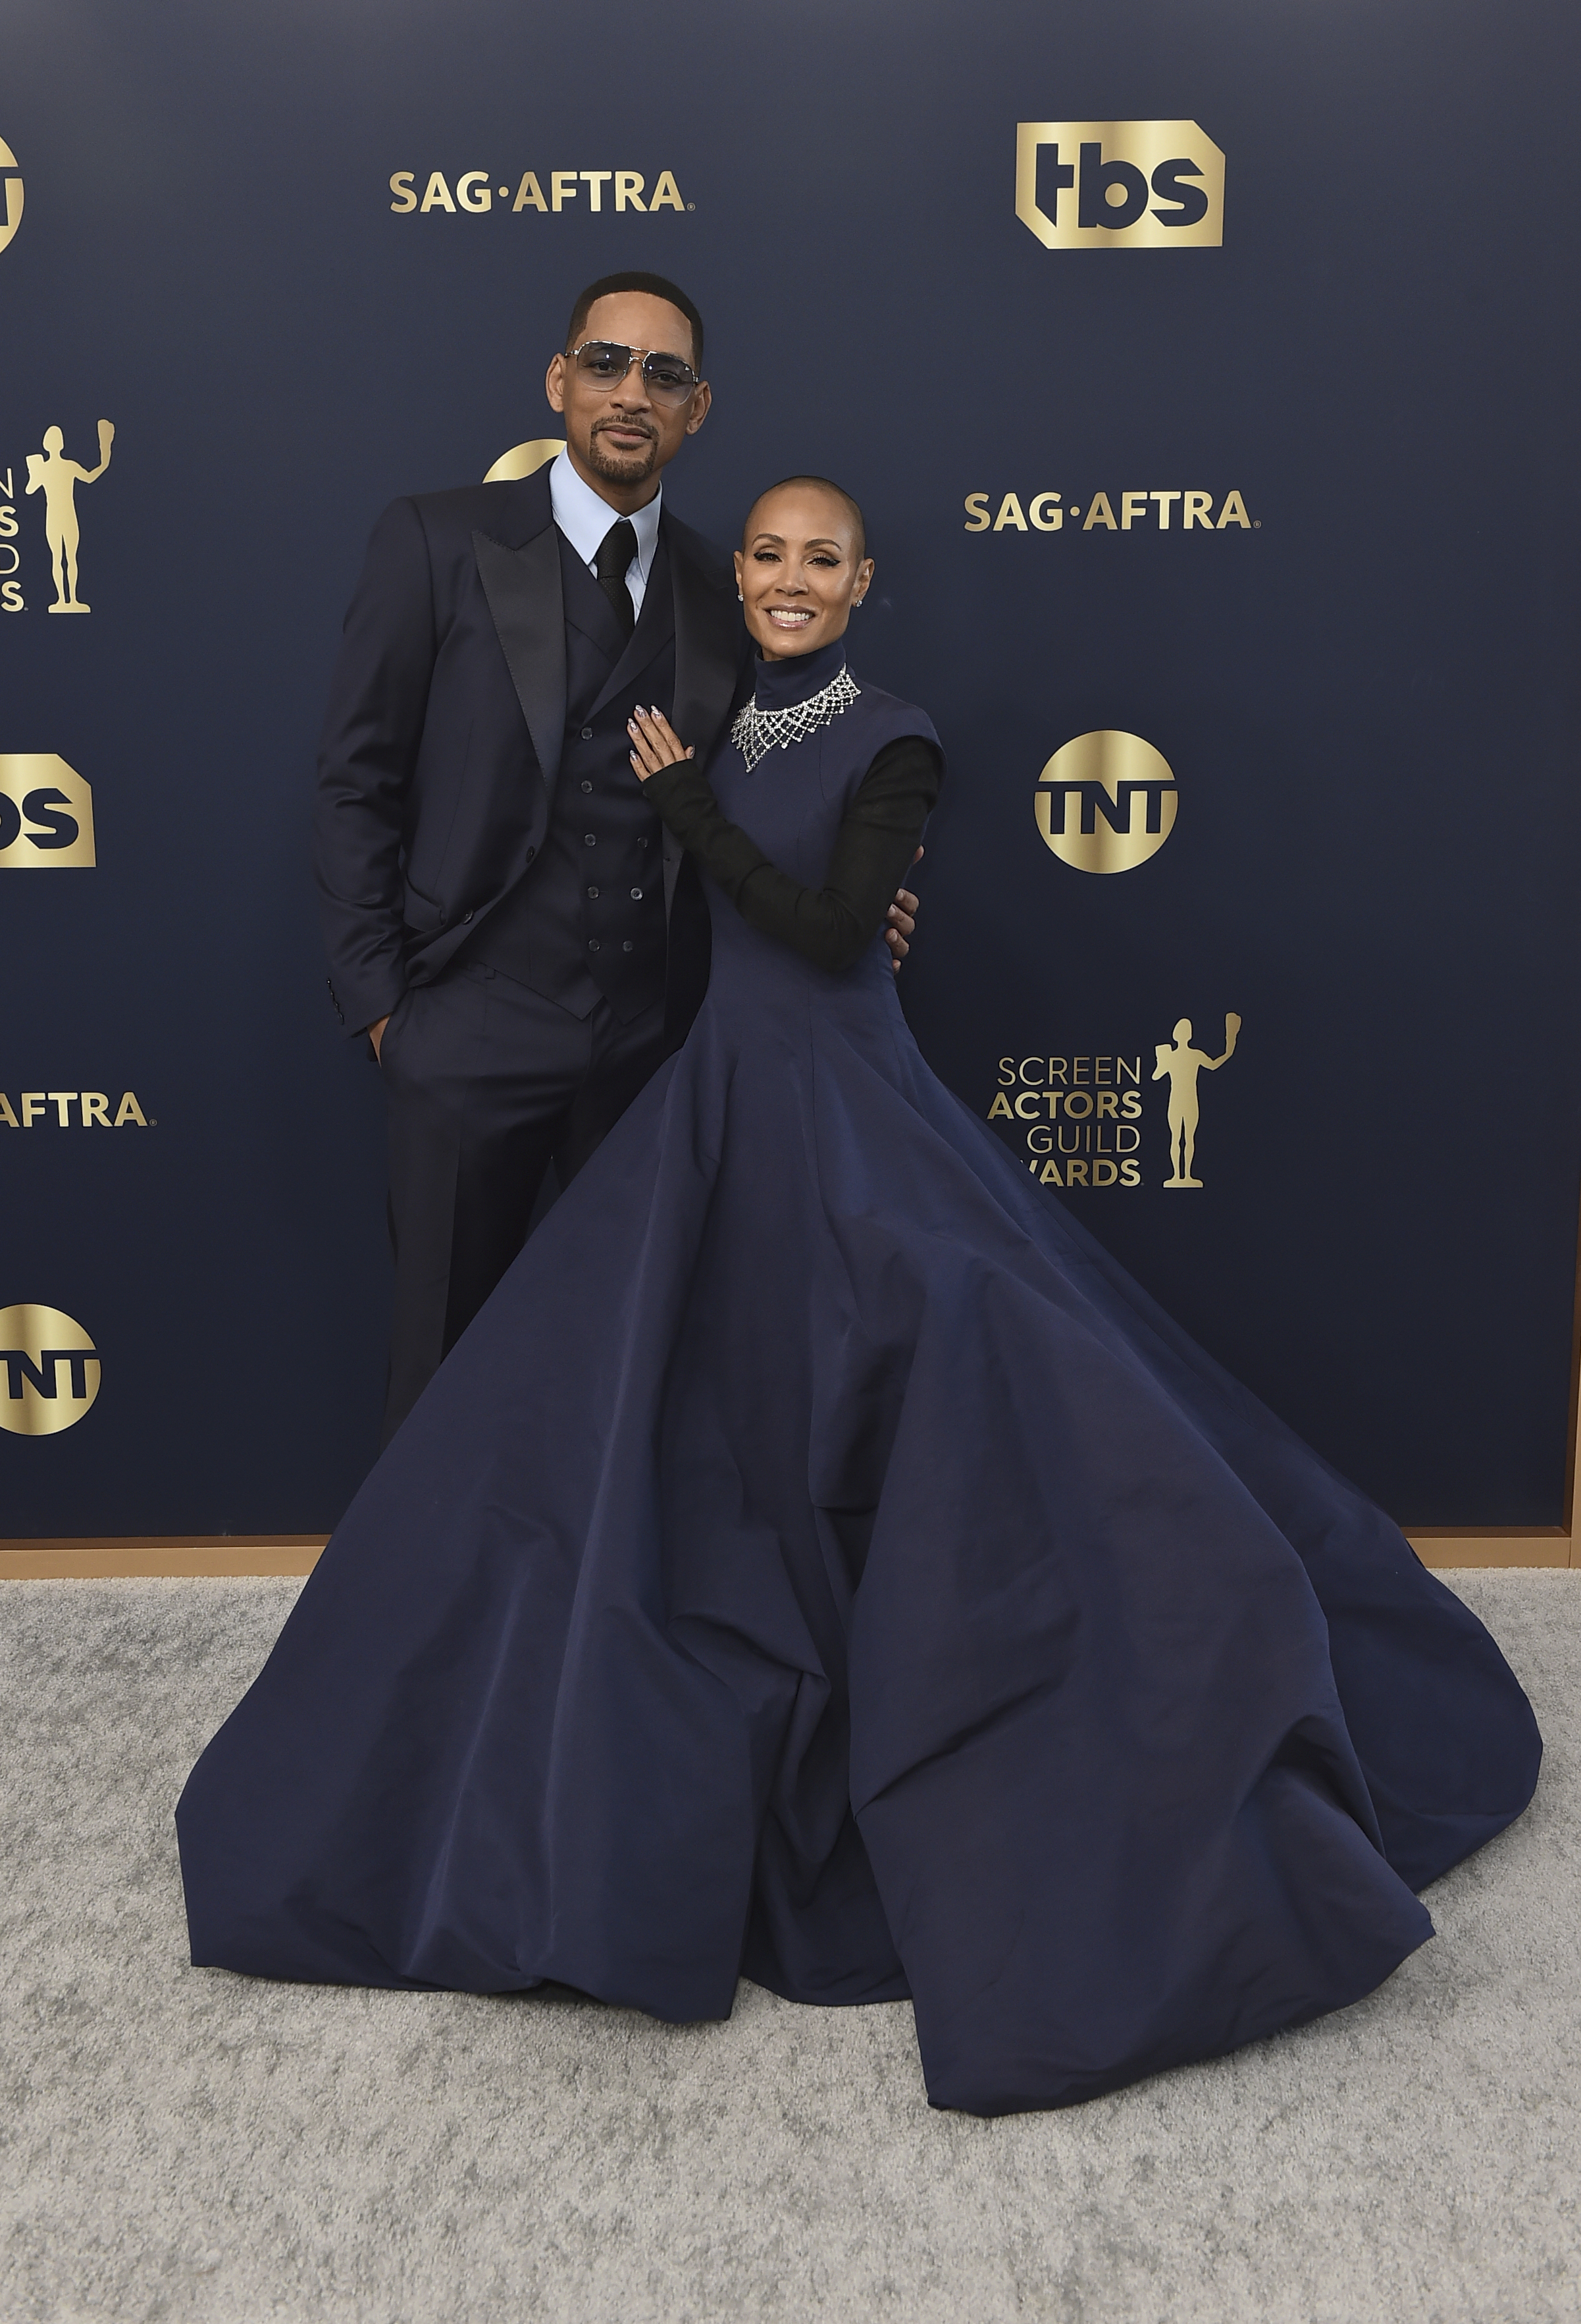 Will Smith wears a navy suit with sunglasses, Jada Pinkette Smith wears a navy floor length gown with long black sleeves